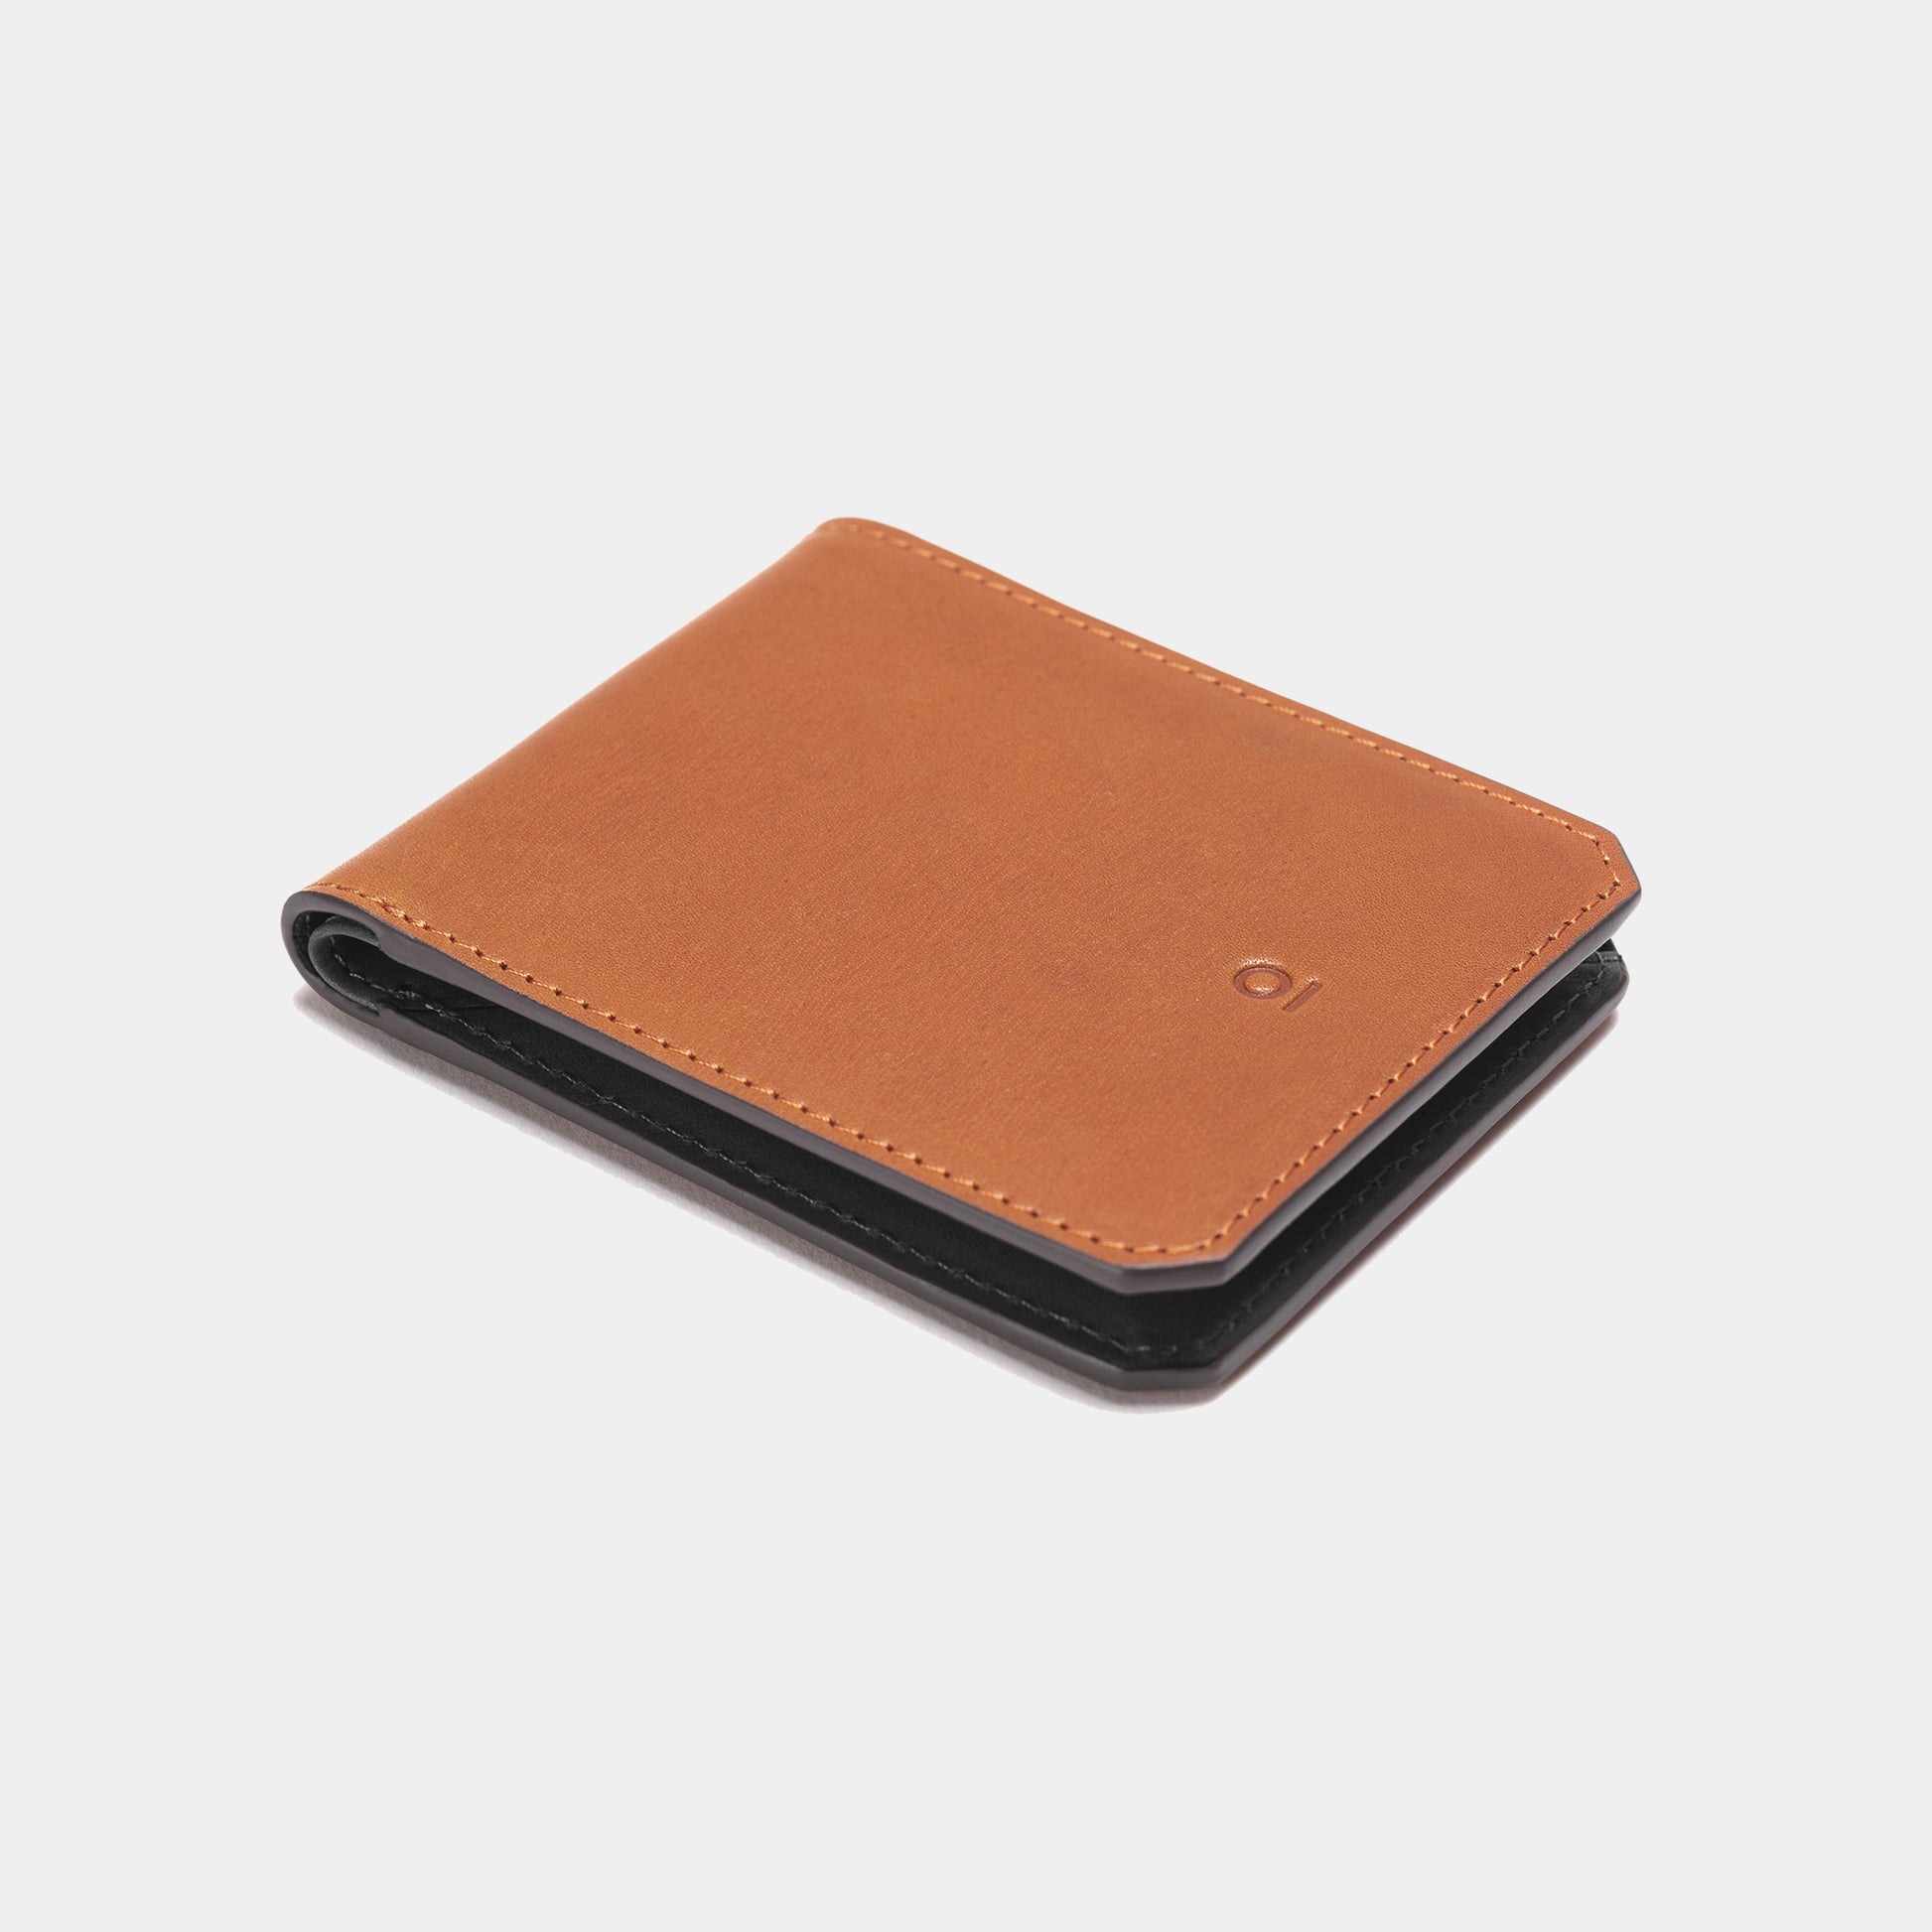 Bellroy Hide & Seek leather wallet includes RFID protection and a